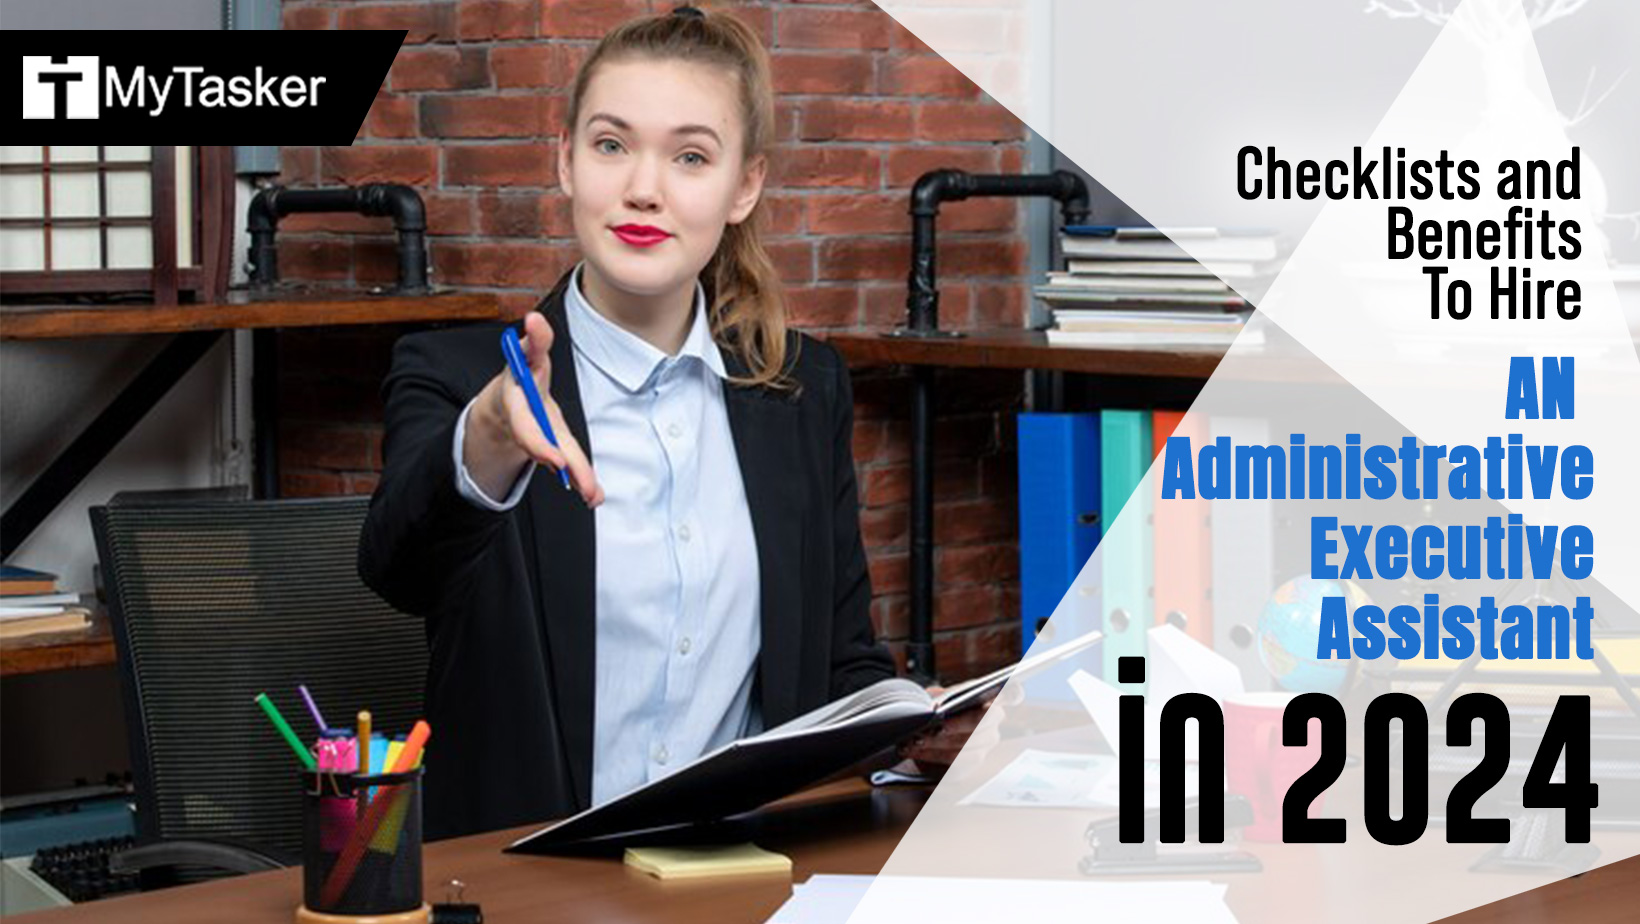 Checklists and Benefits To Hire An Administrative Executive Assistant in 2024